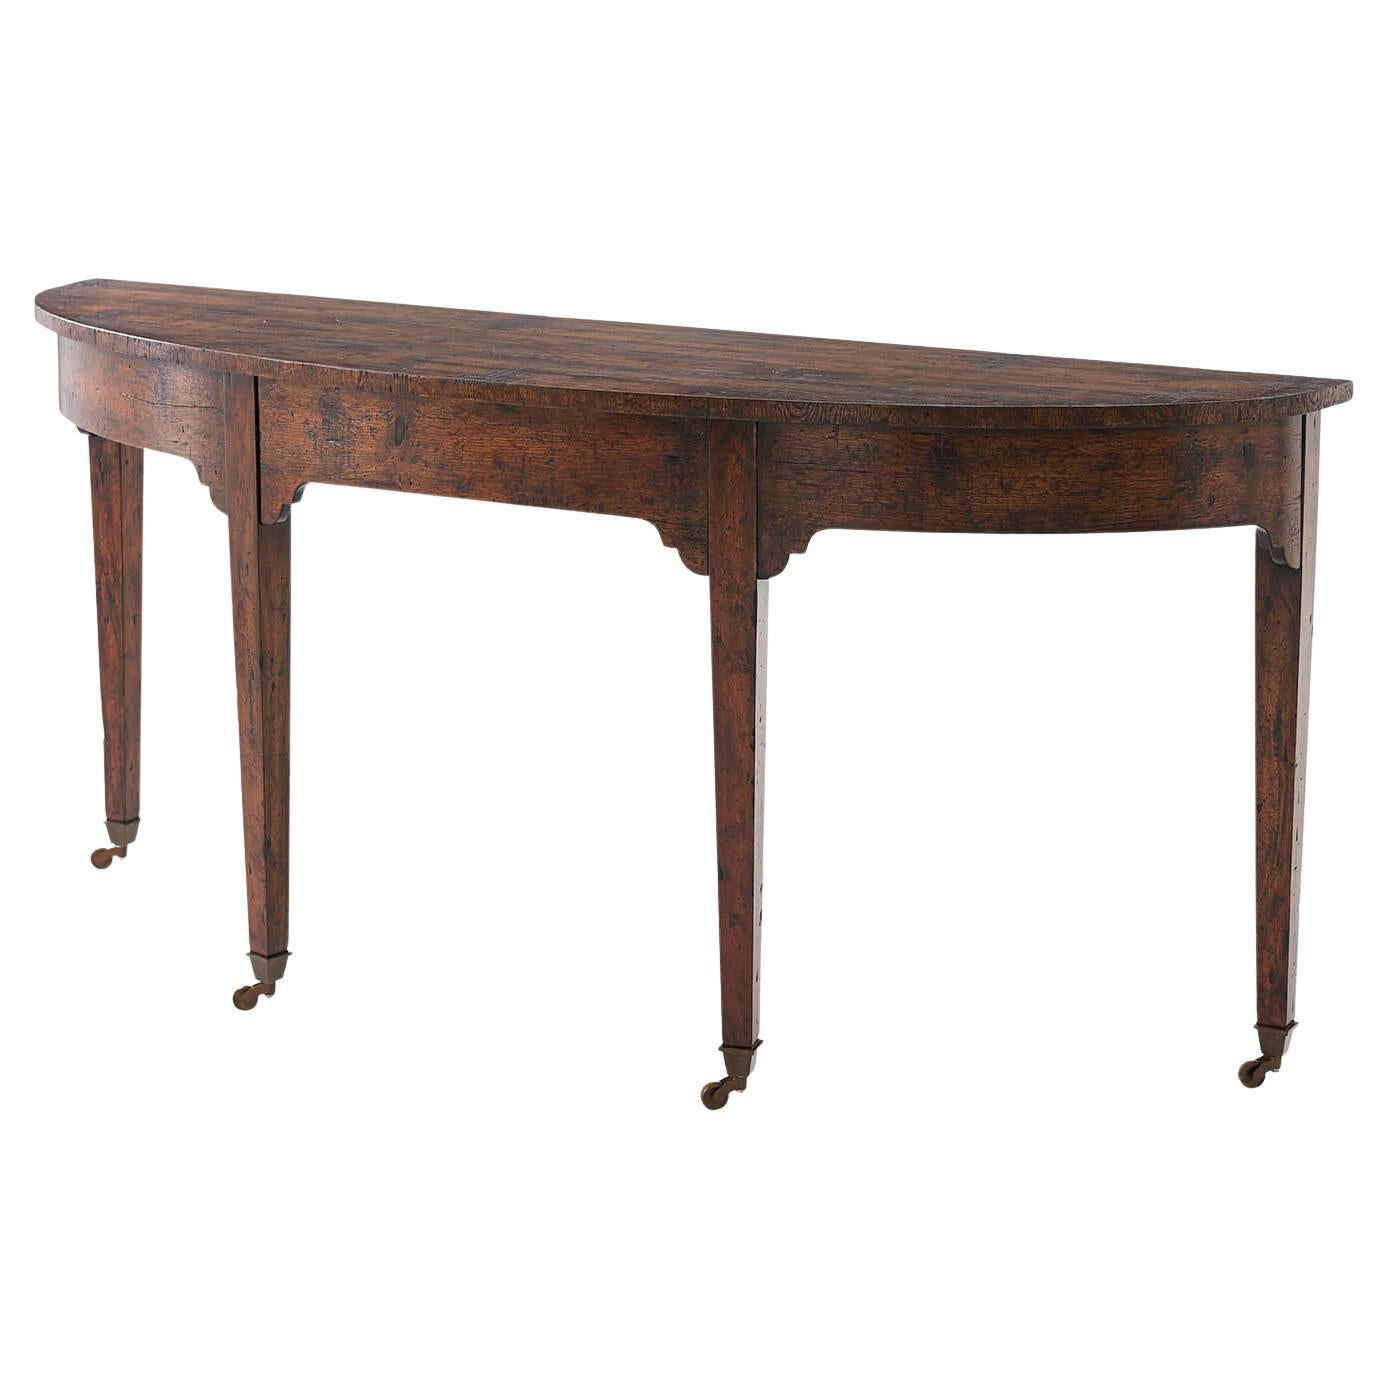 Georgian Bowfront Console Table